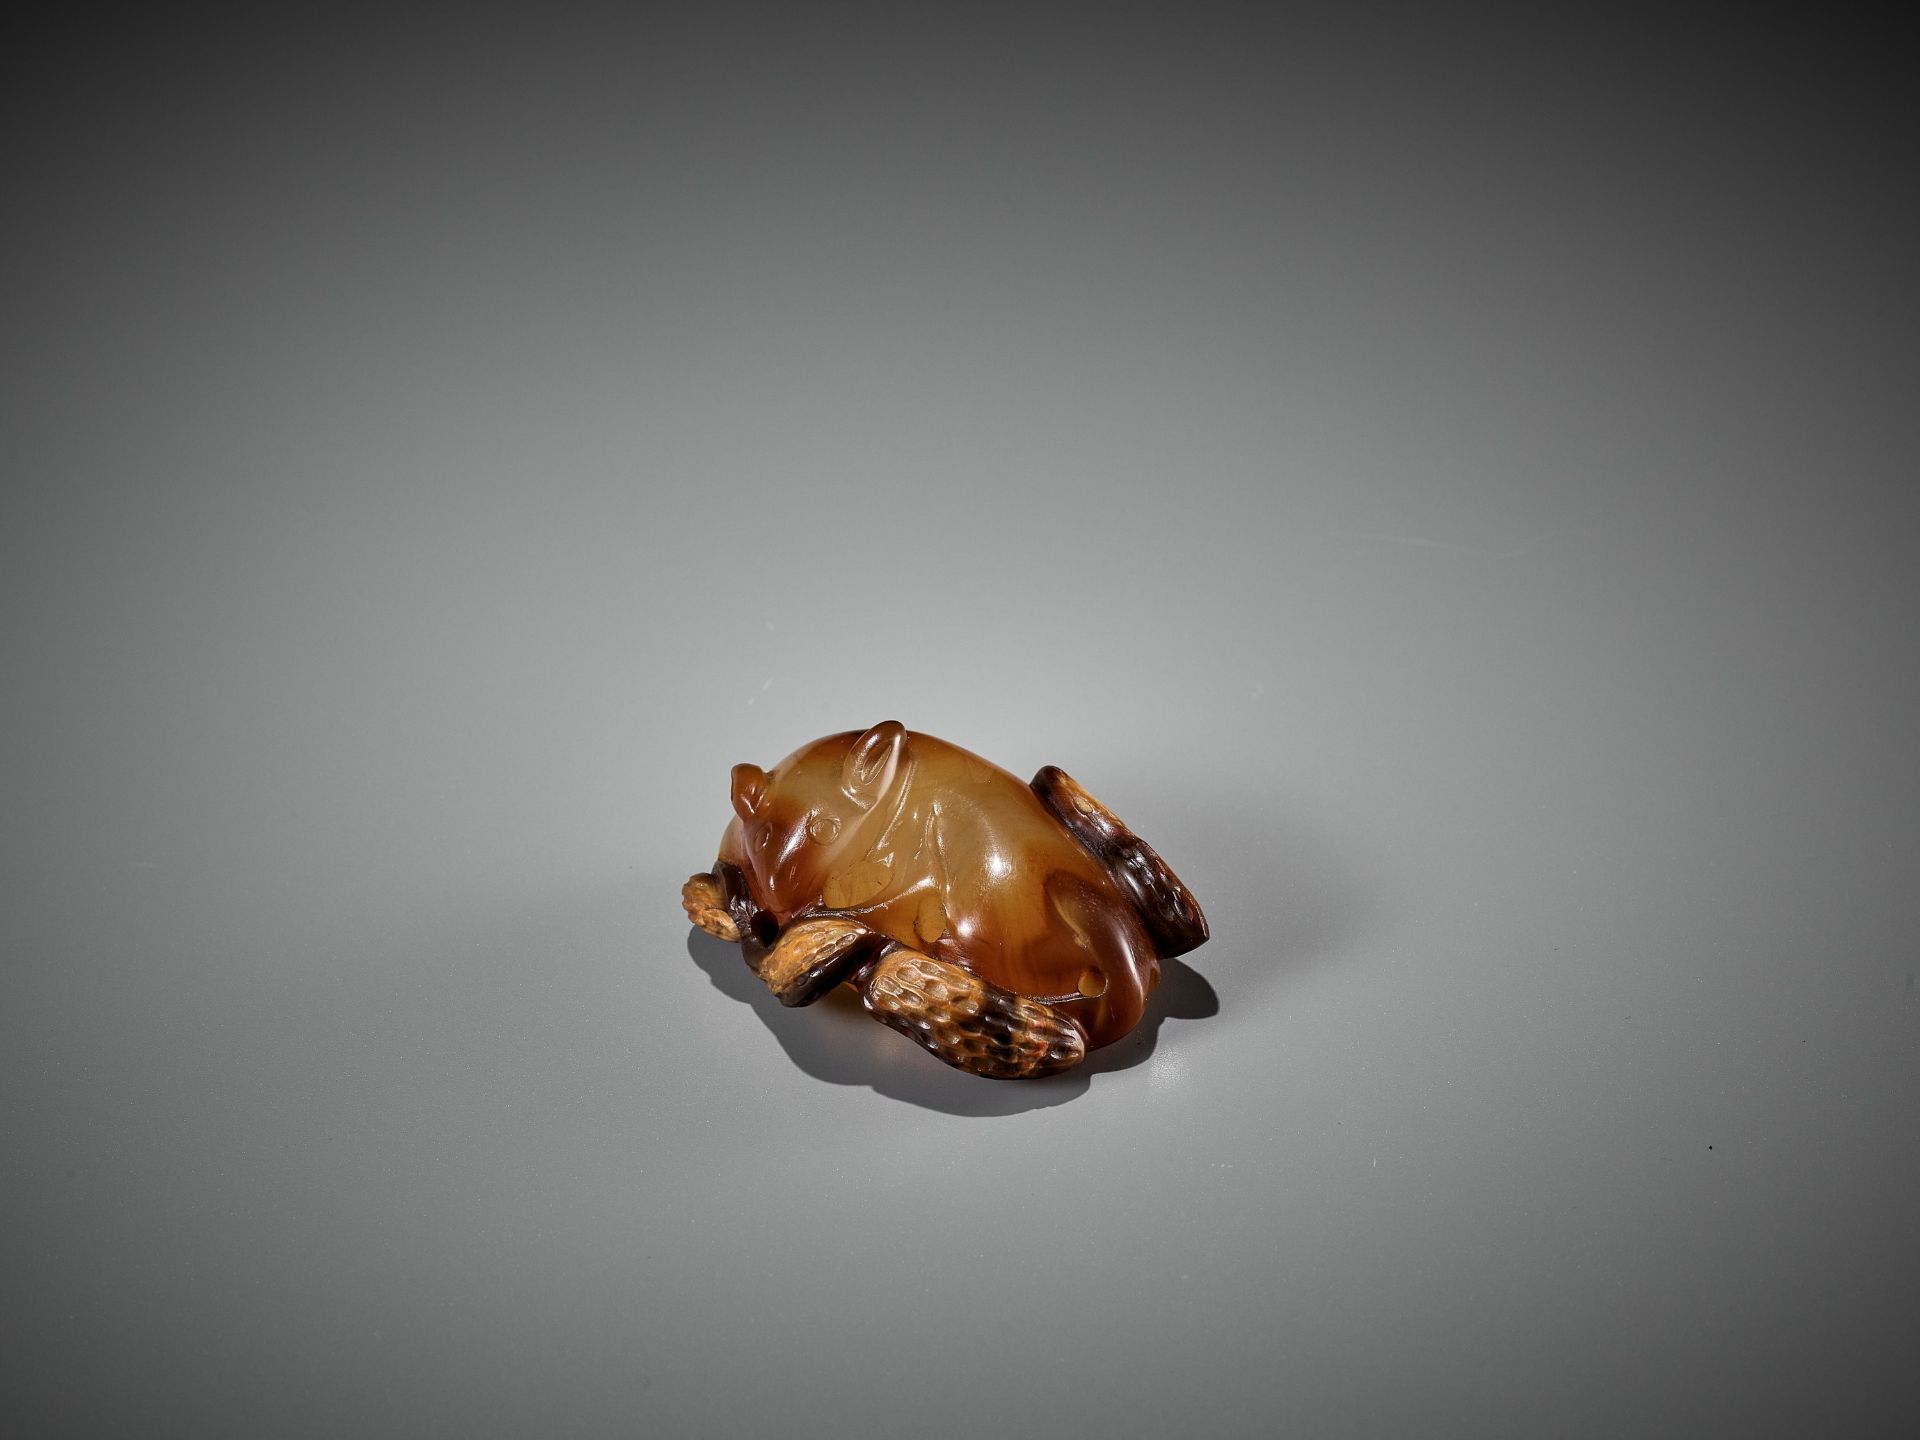 AN AGATE PENDANT OF A SQUIRREL WITH PEANUTS, 18TH-19TH CENTURY - Image 11 of 14